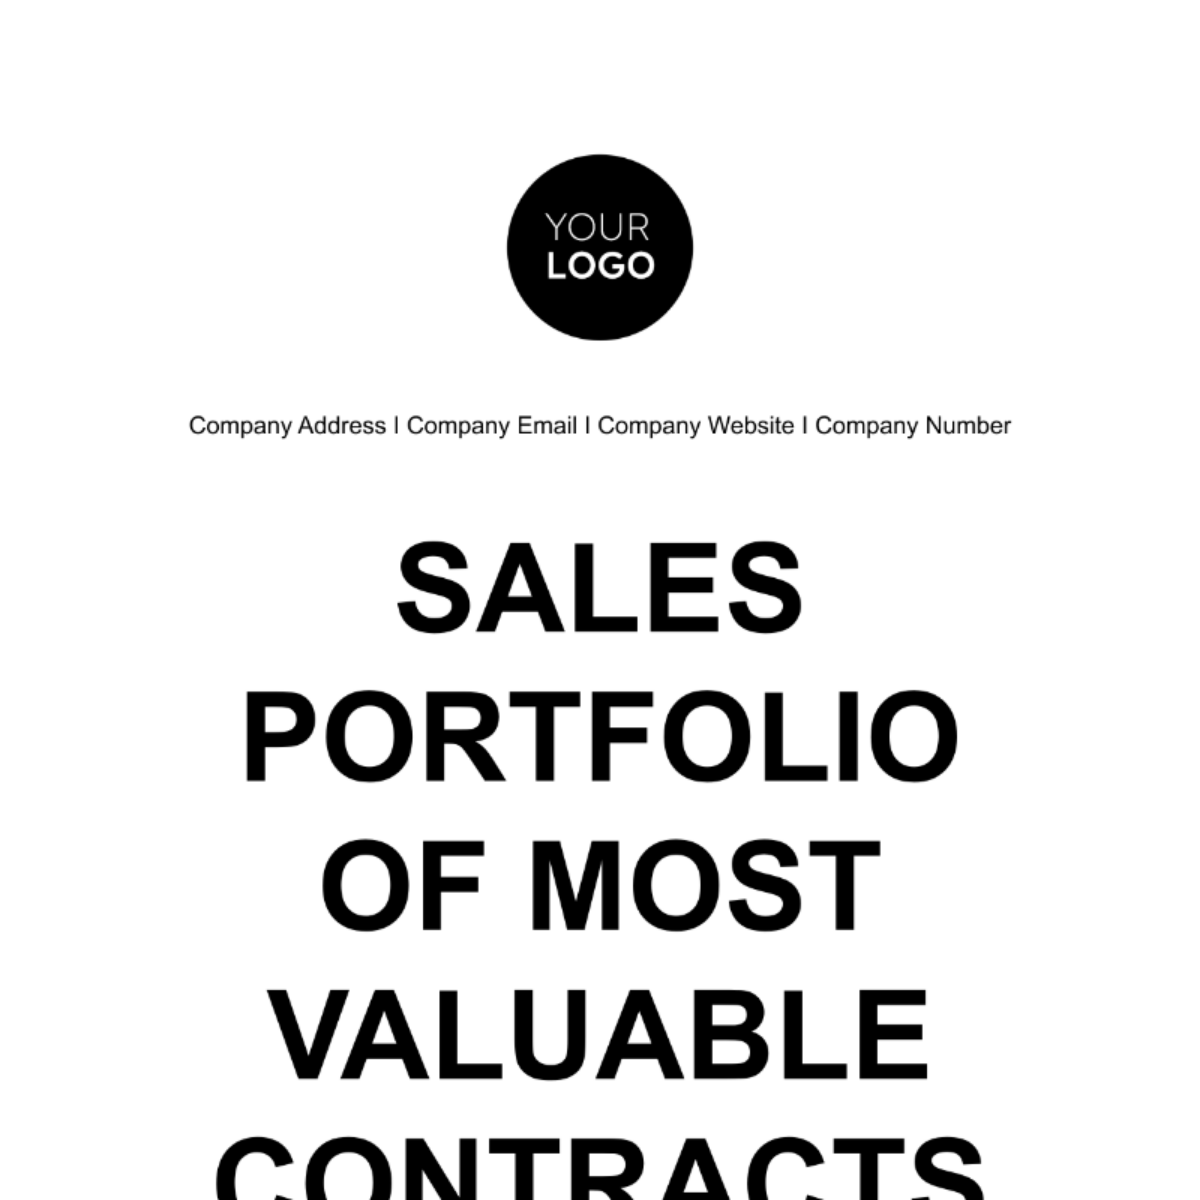 Free Sales Portfolio of Most Valuable Contracts Template